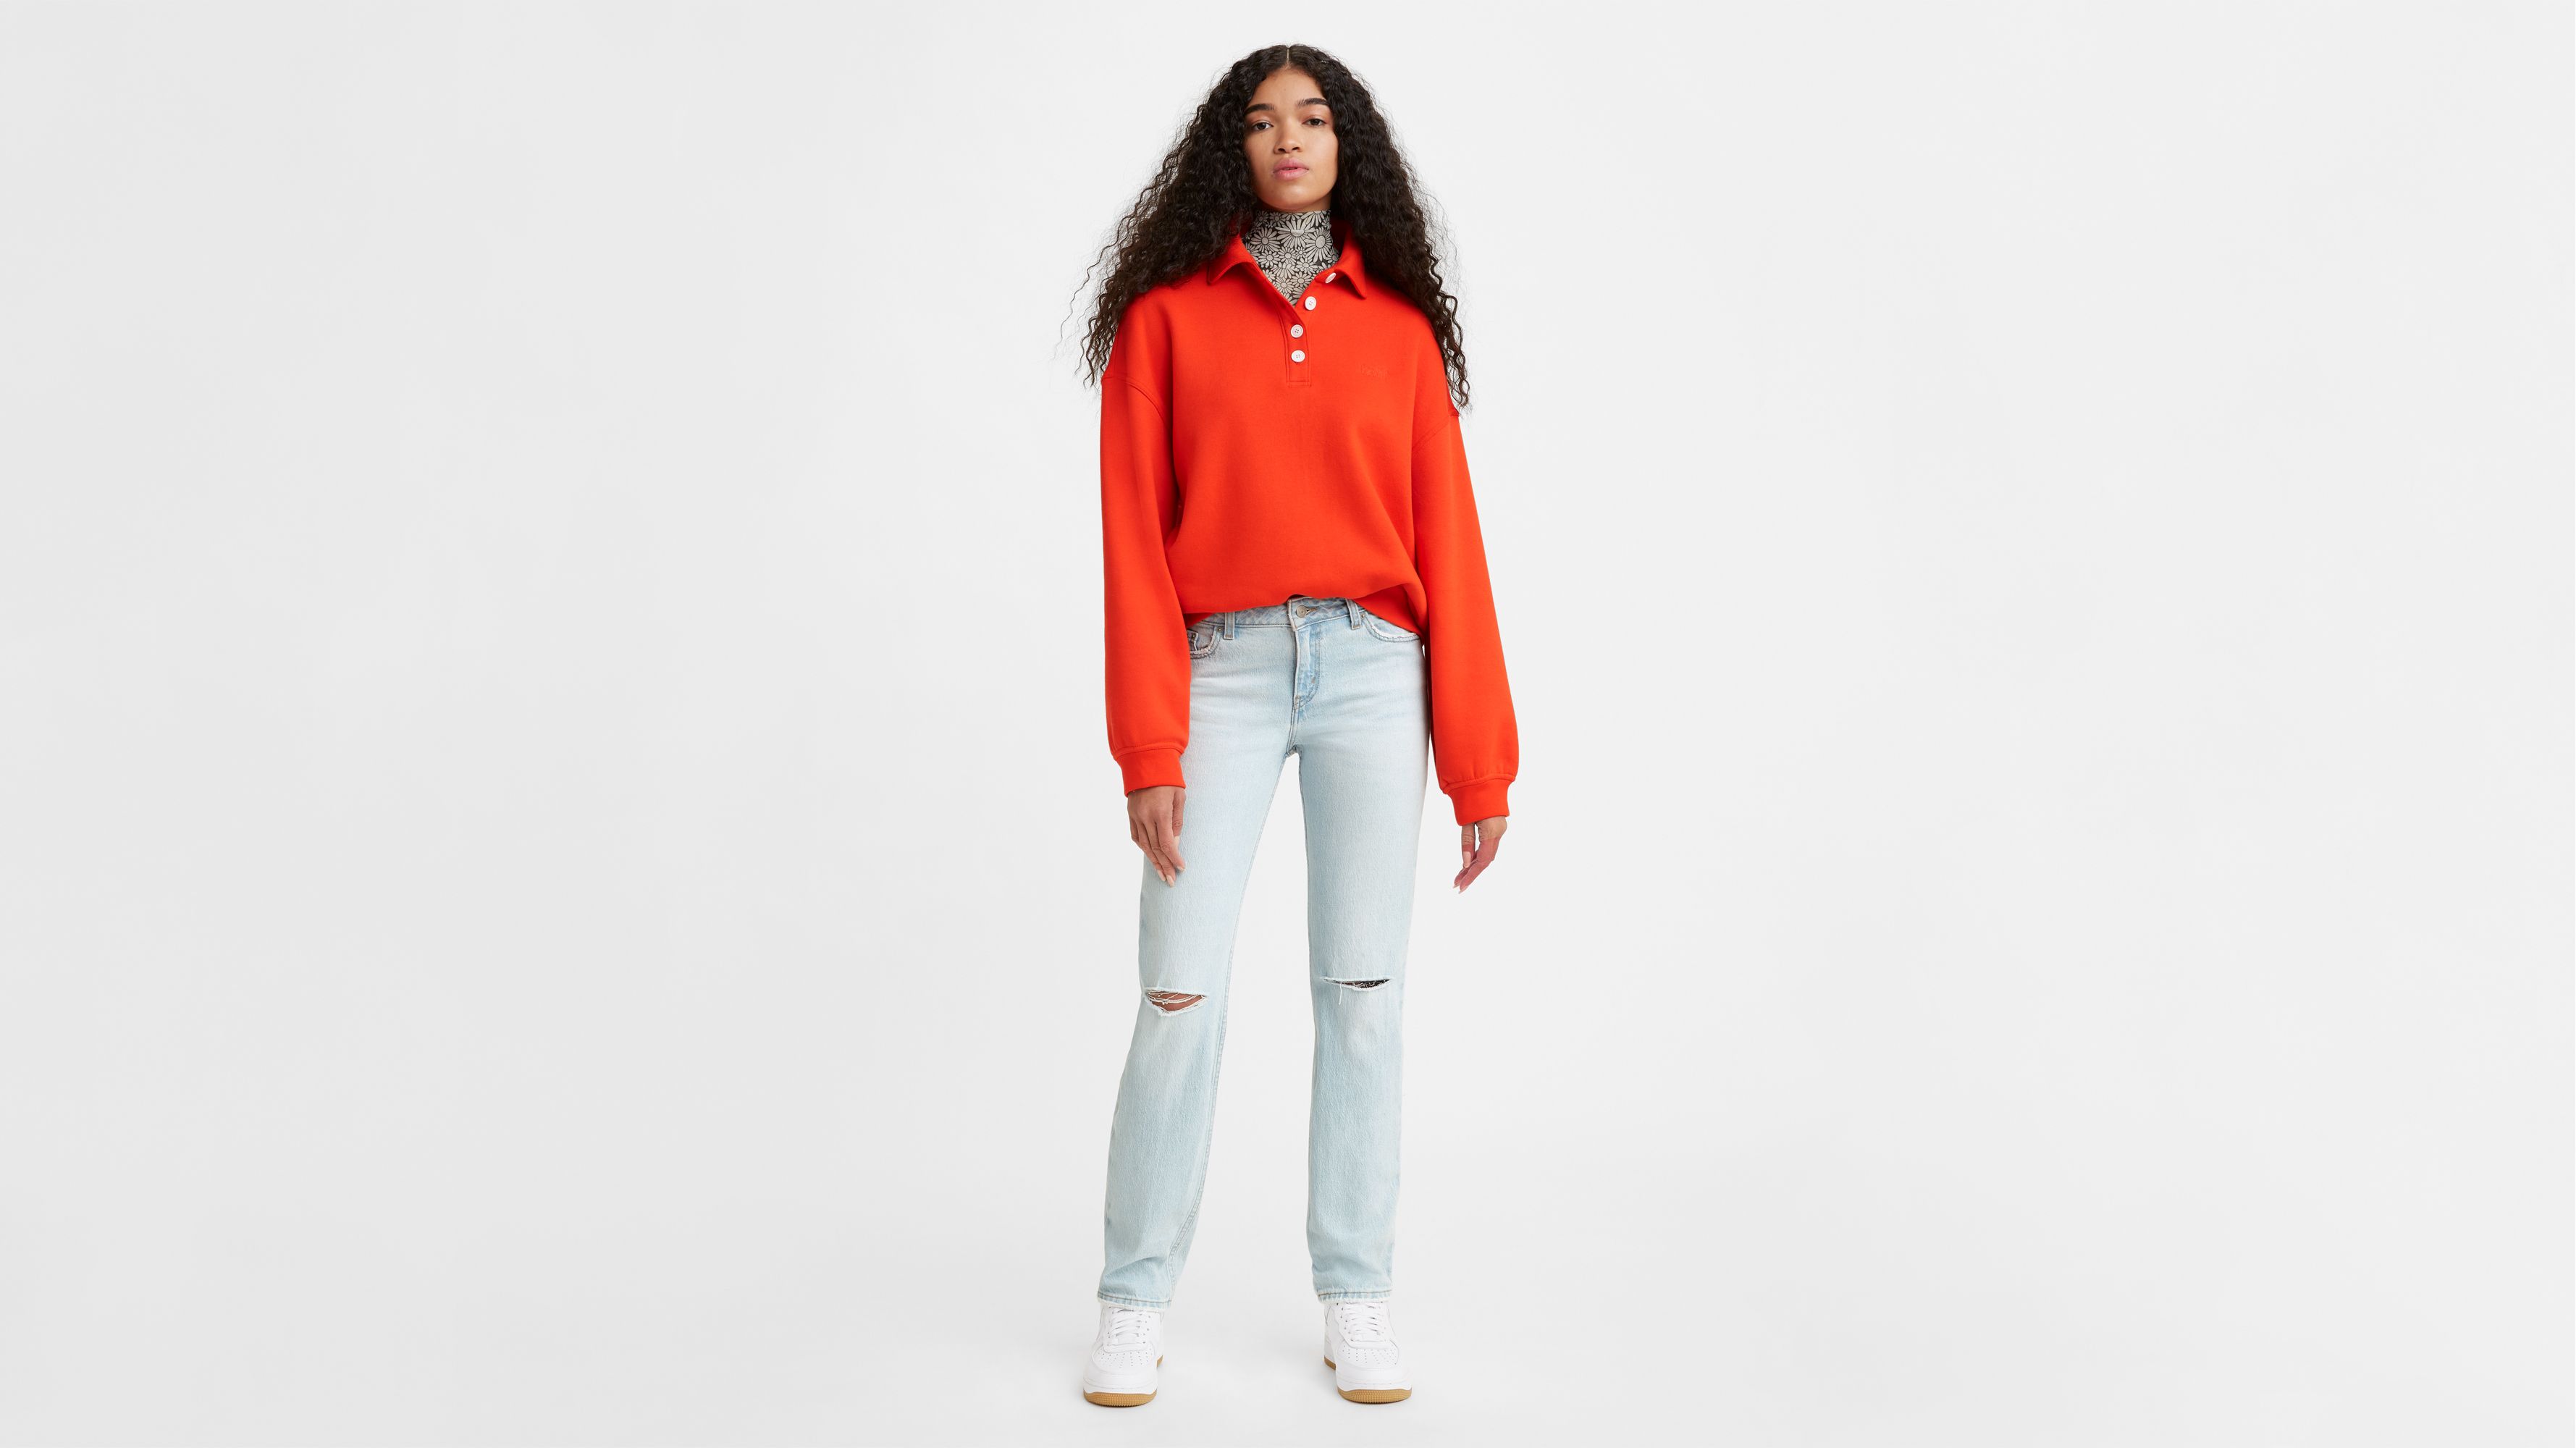 Low Pitch Straight Fit Women's Jeans - Light Wash | Levi's® US